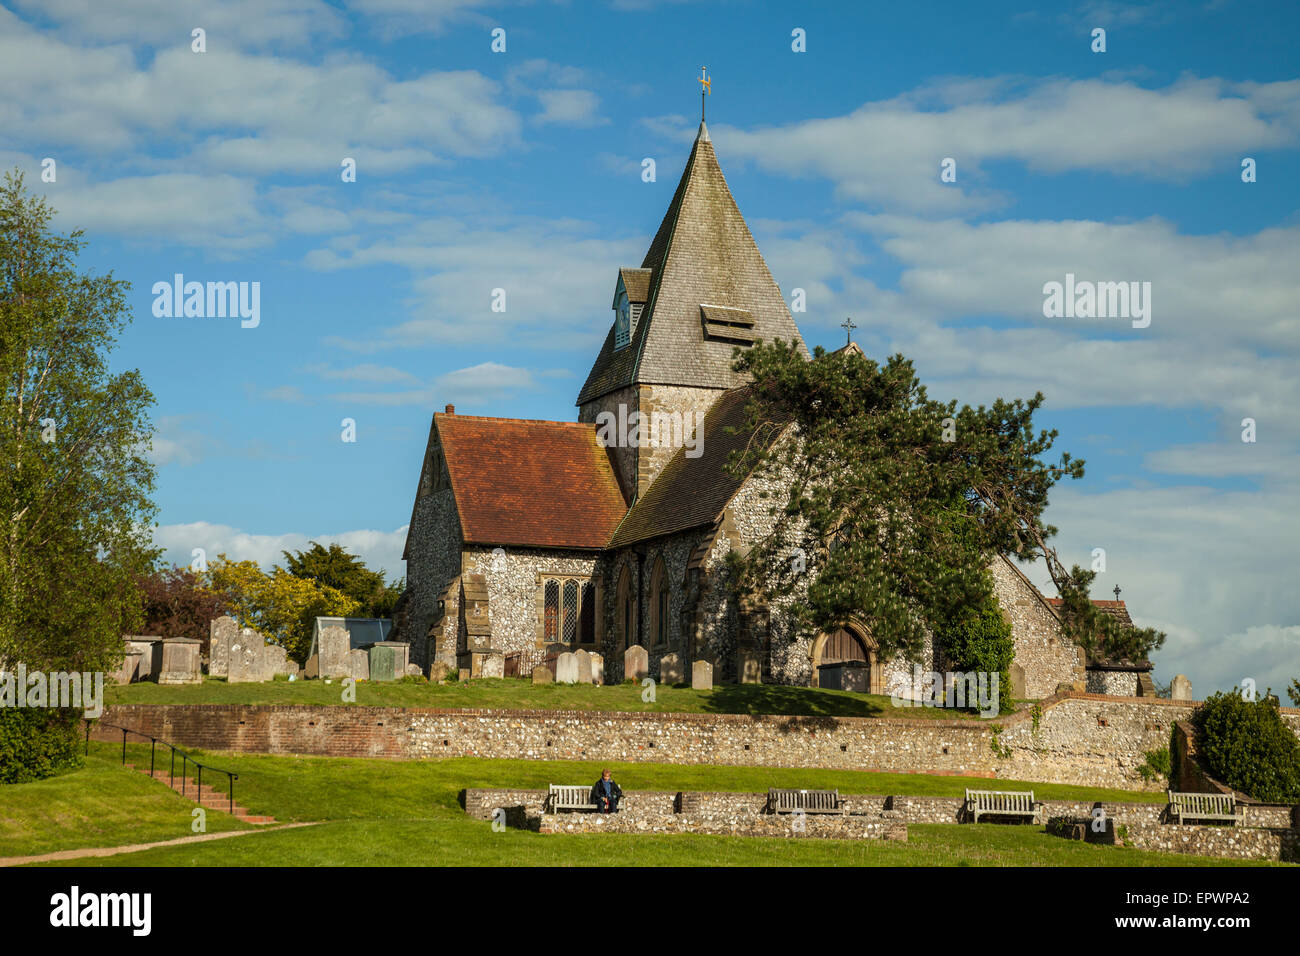 St Margaret's Church in Ditchling, East Sussex, Angleterre. Banque D'Images